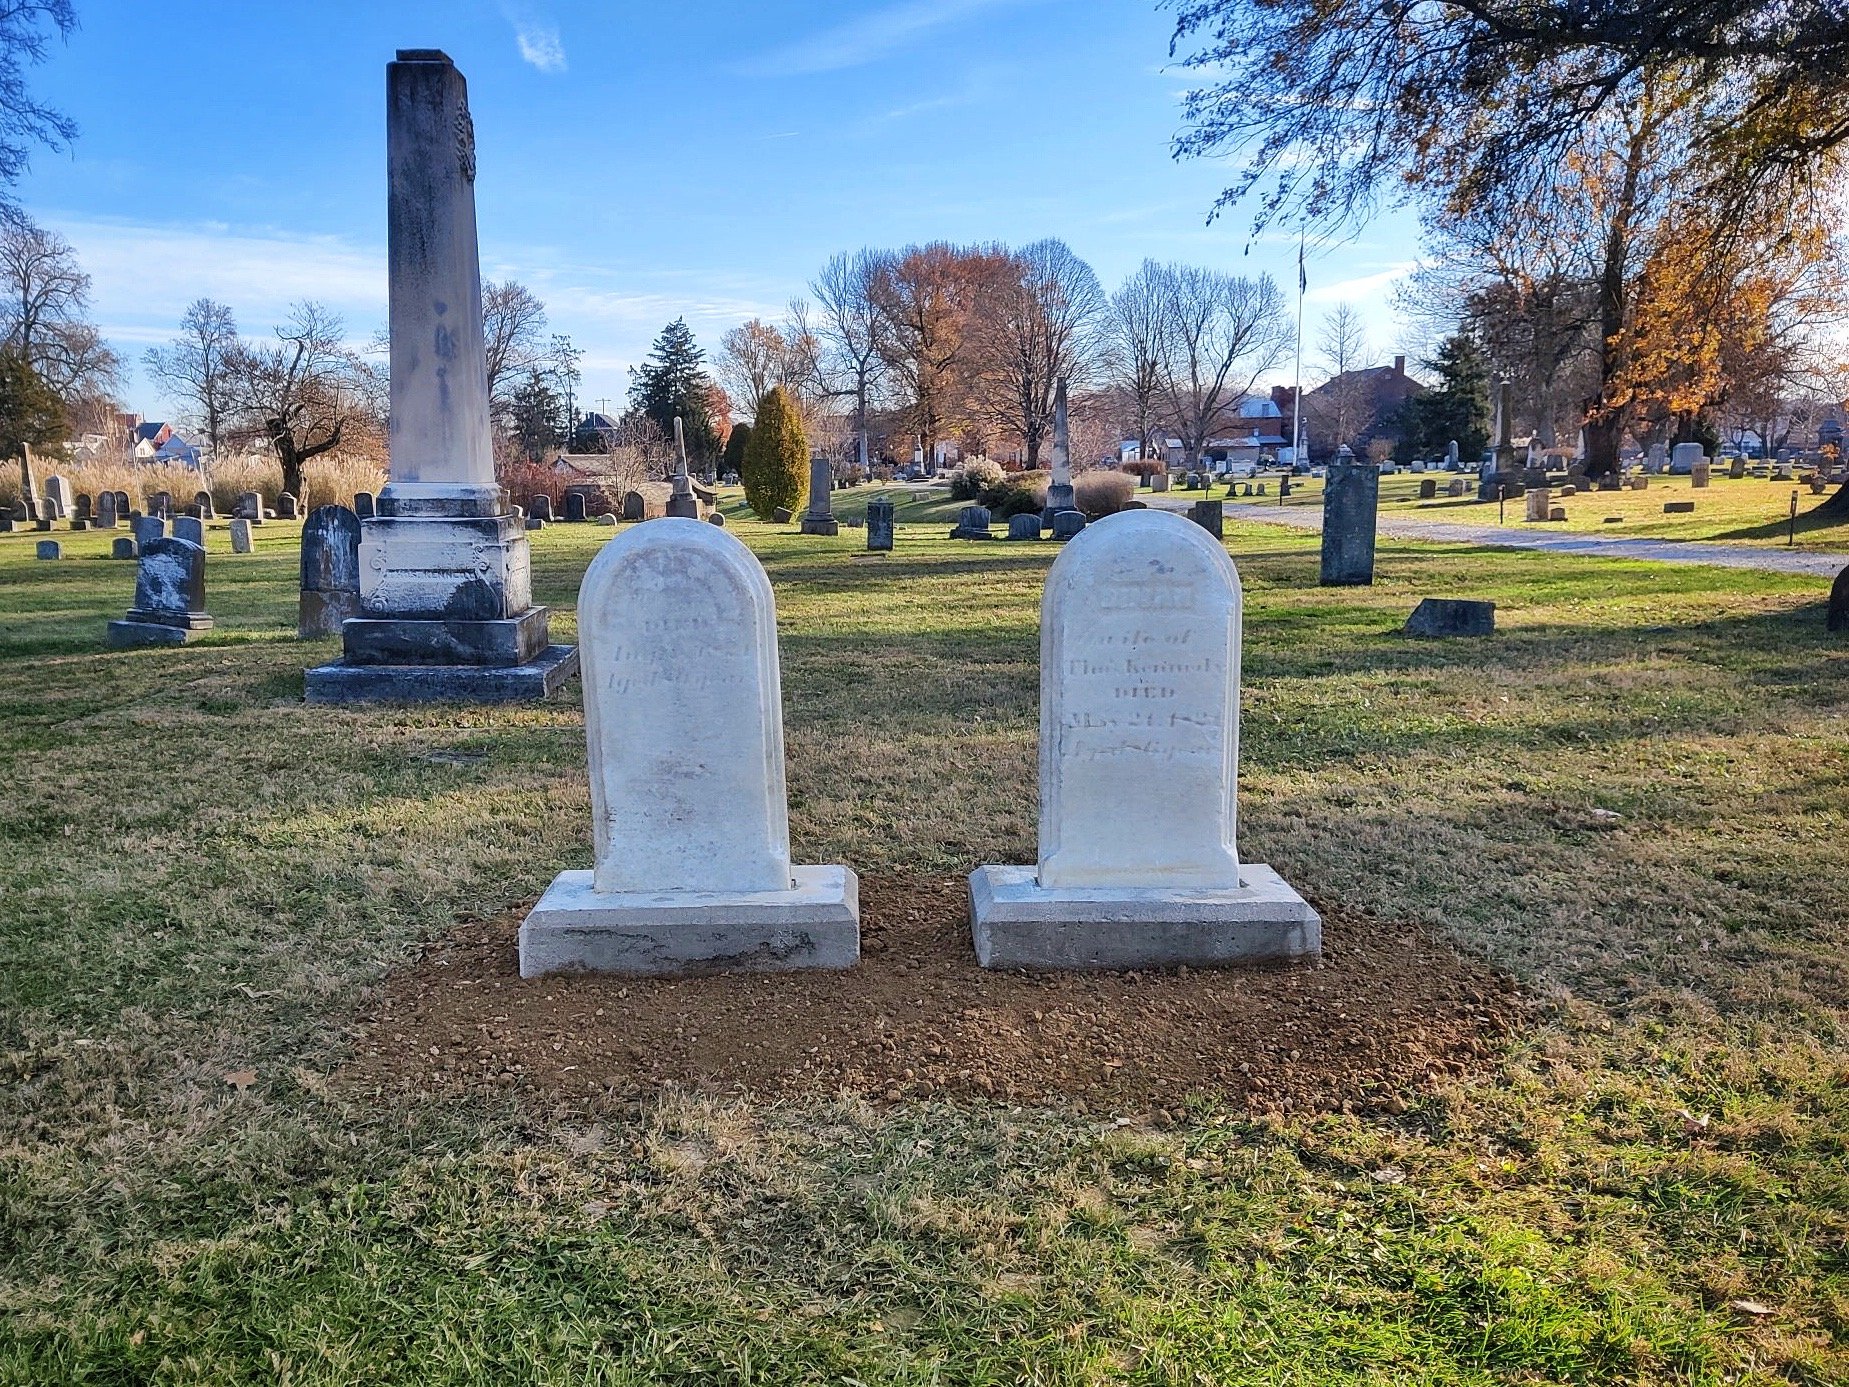 The headstones joined to concrete footers at the burial sites.